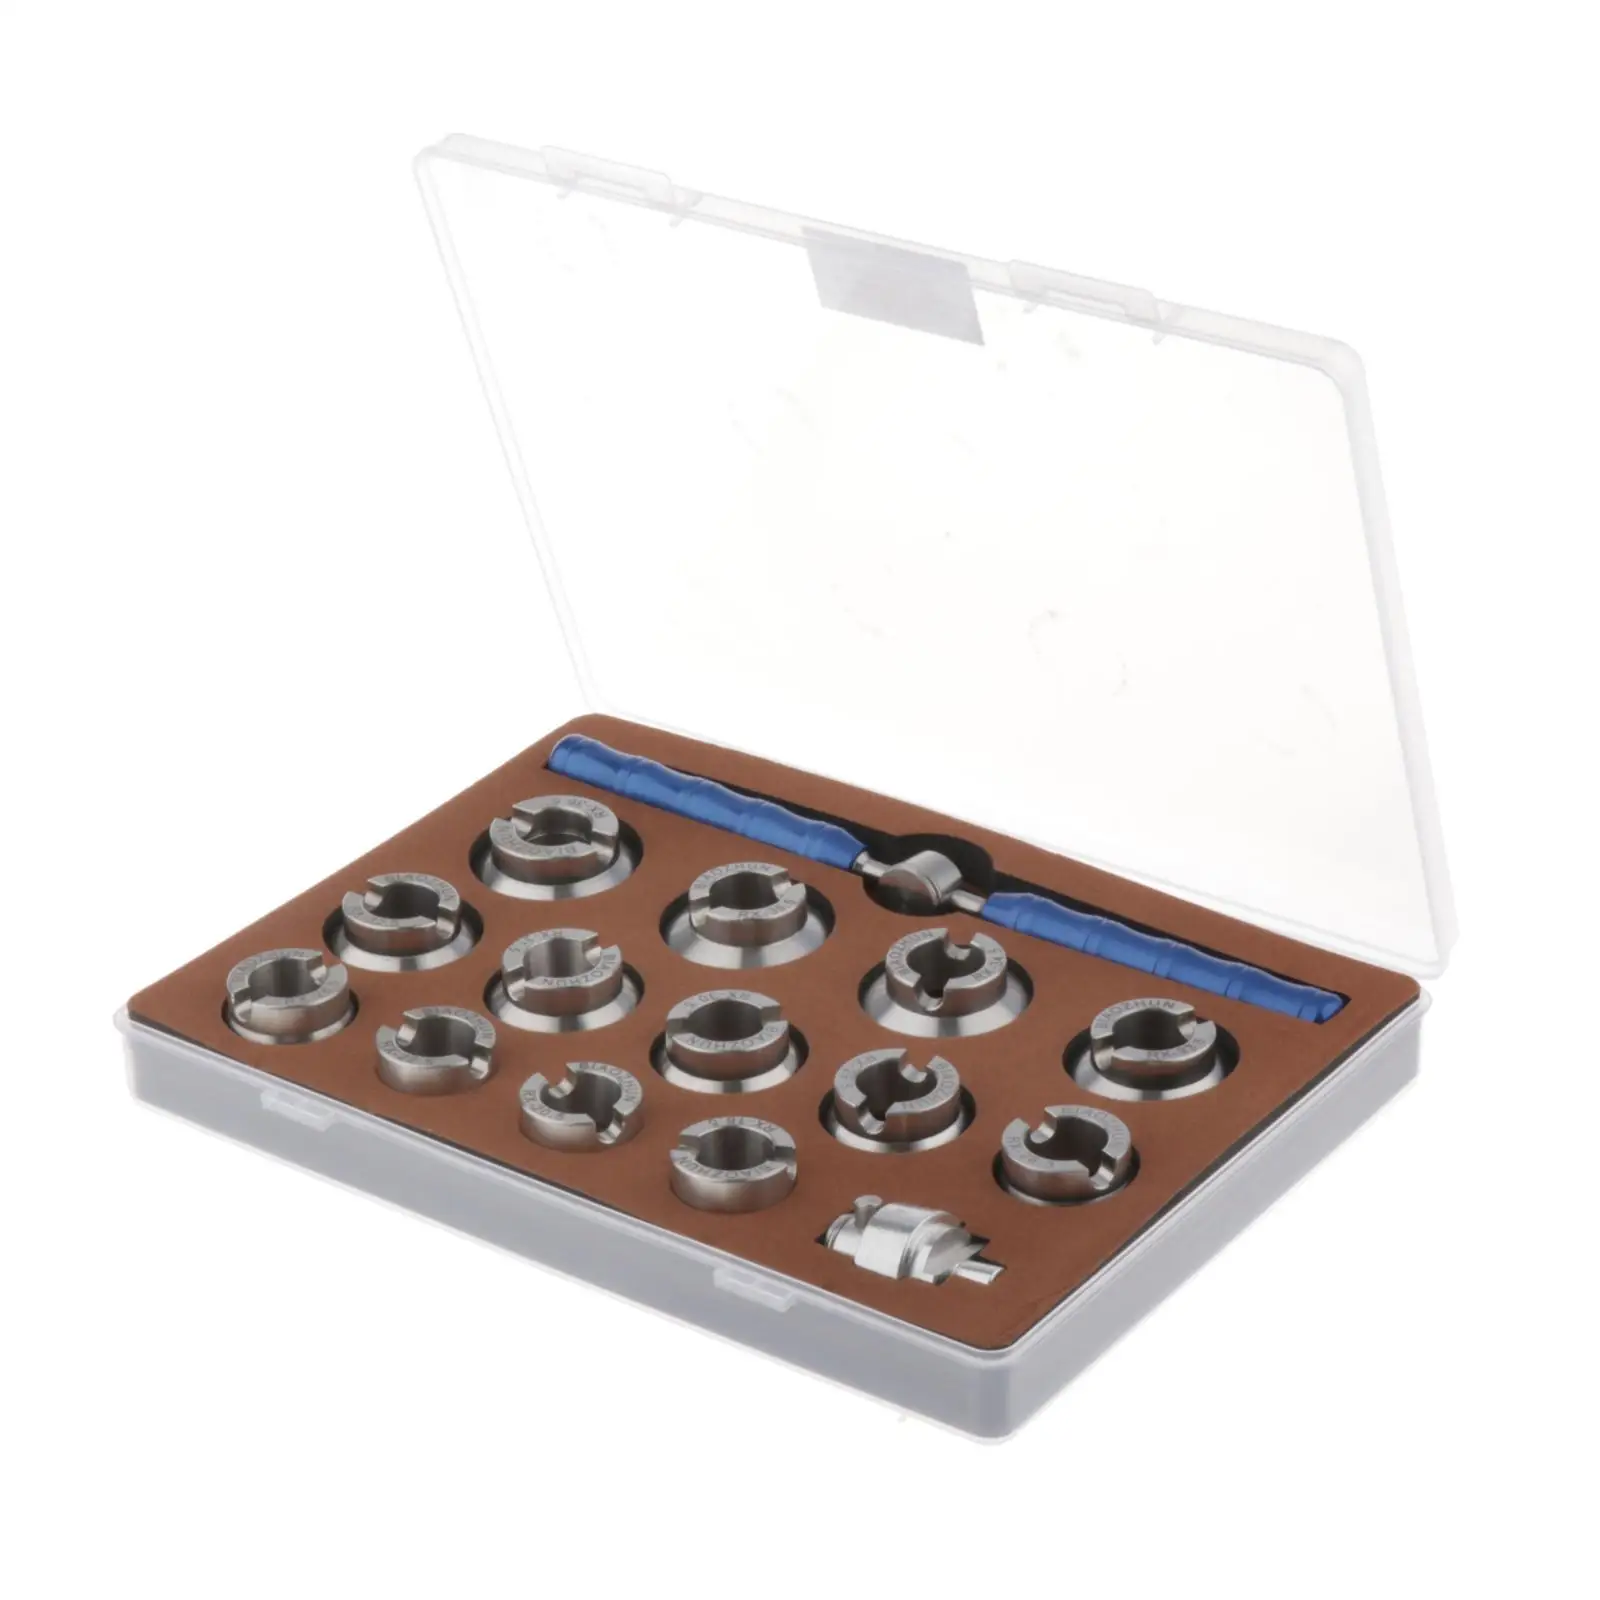 Watch Back Case Opener Set 13 Piece Watch Repair Tool for 13 Sizes